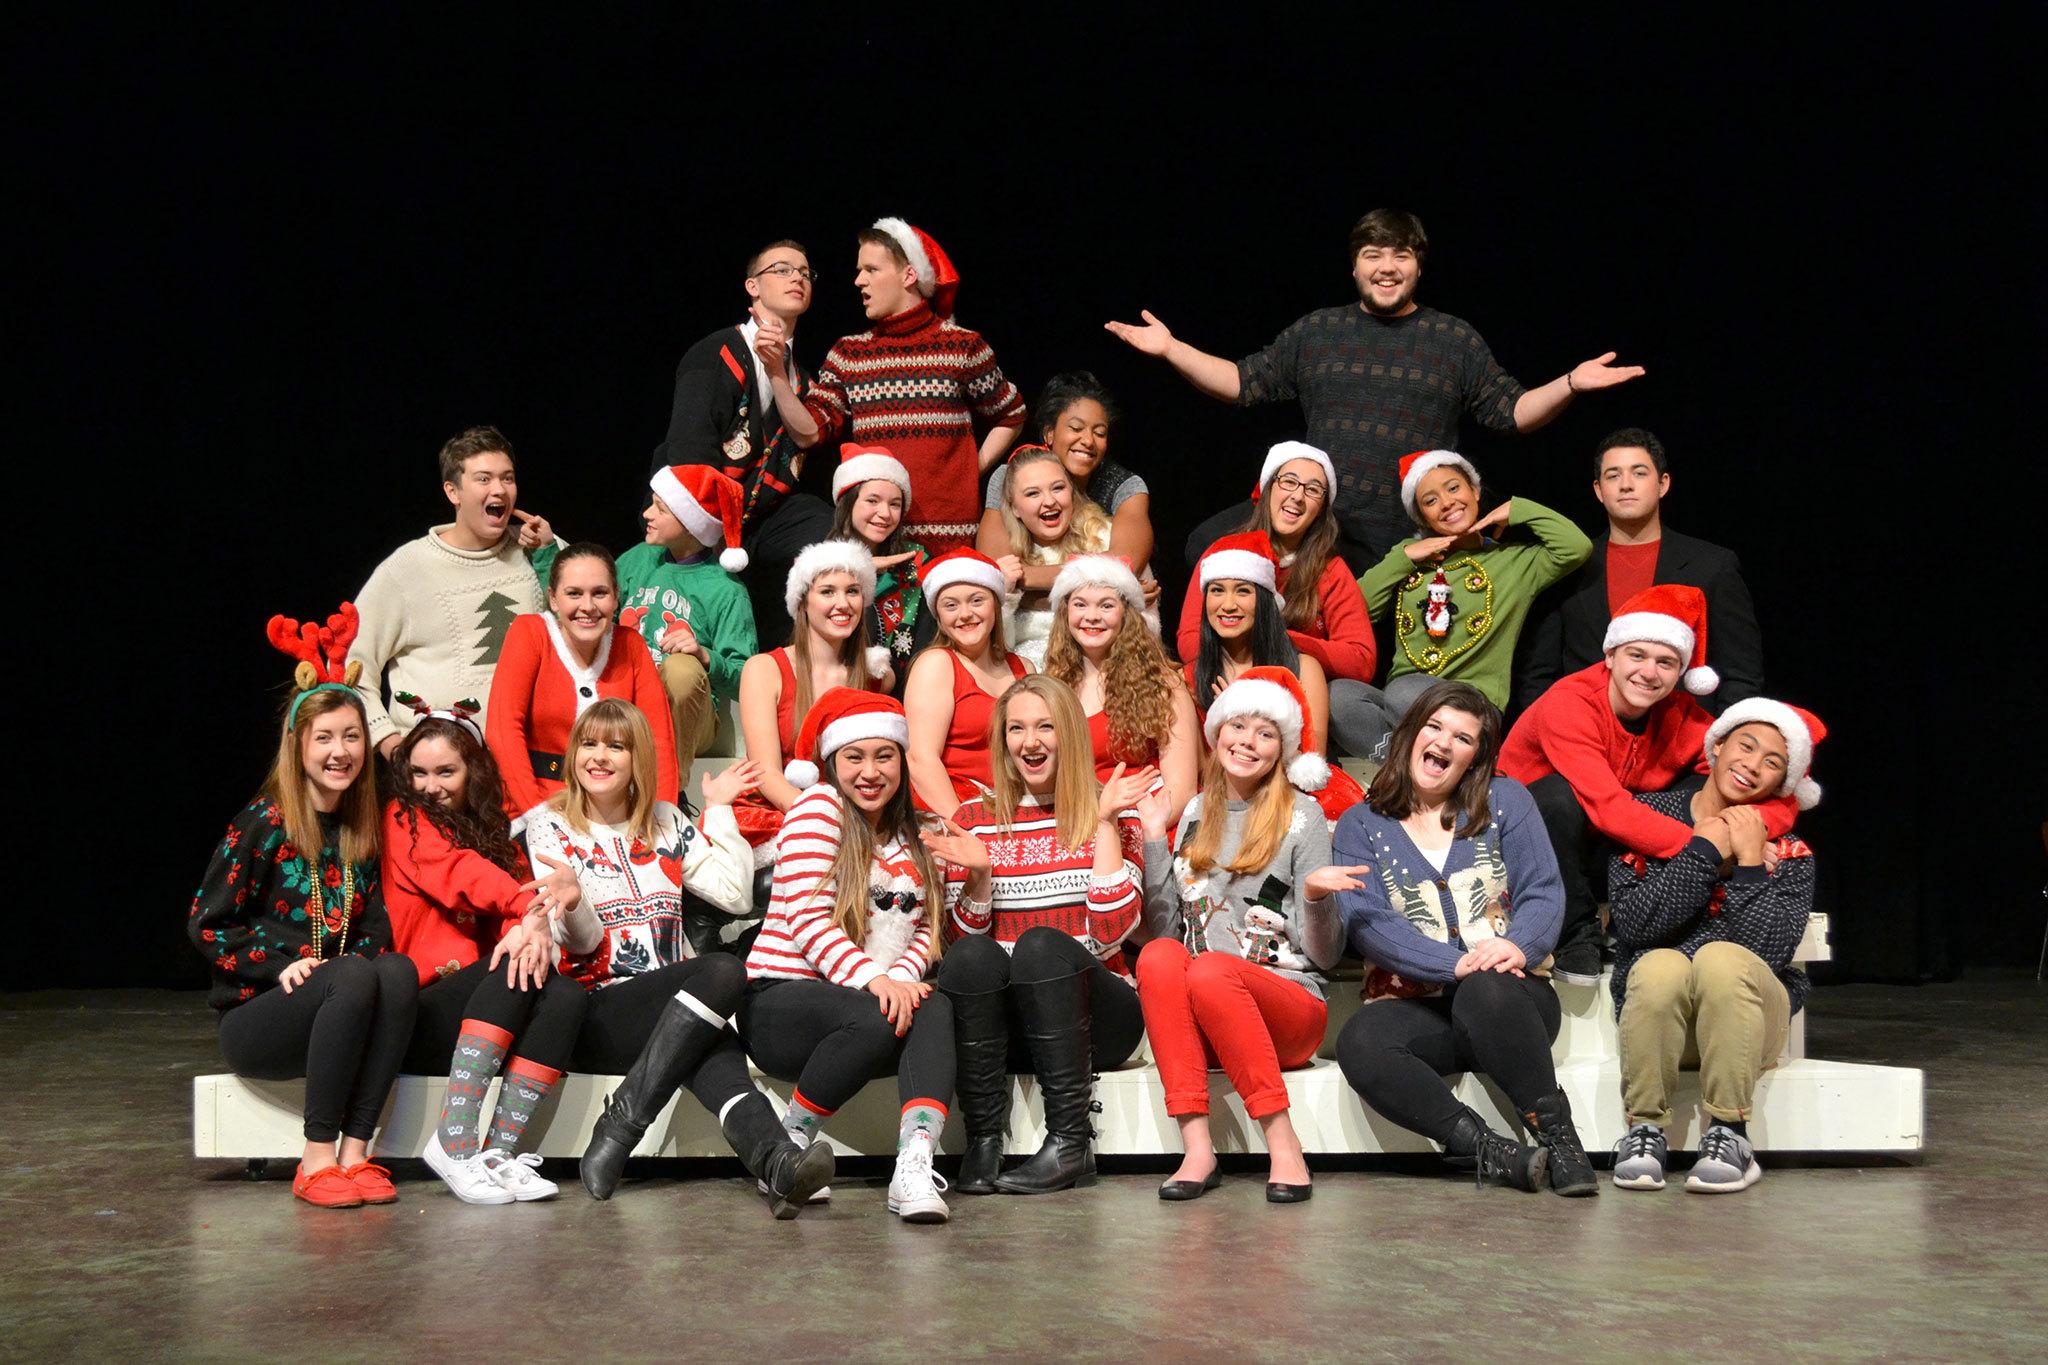 The senior class play at Sequim High features 22 seniors singing and dancing for “A Holiday Spectacular” on Dec. 9-10 and Dec. 16-17. Sequim Gazette photo by Matthew Nash